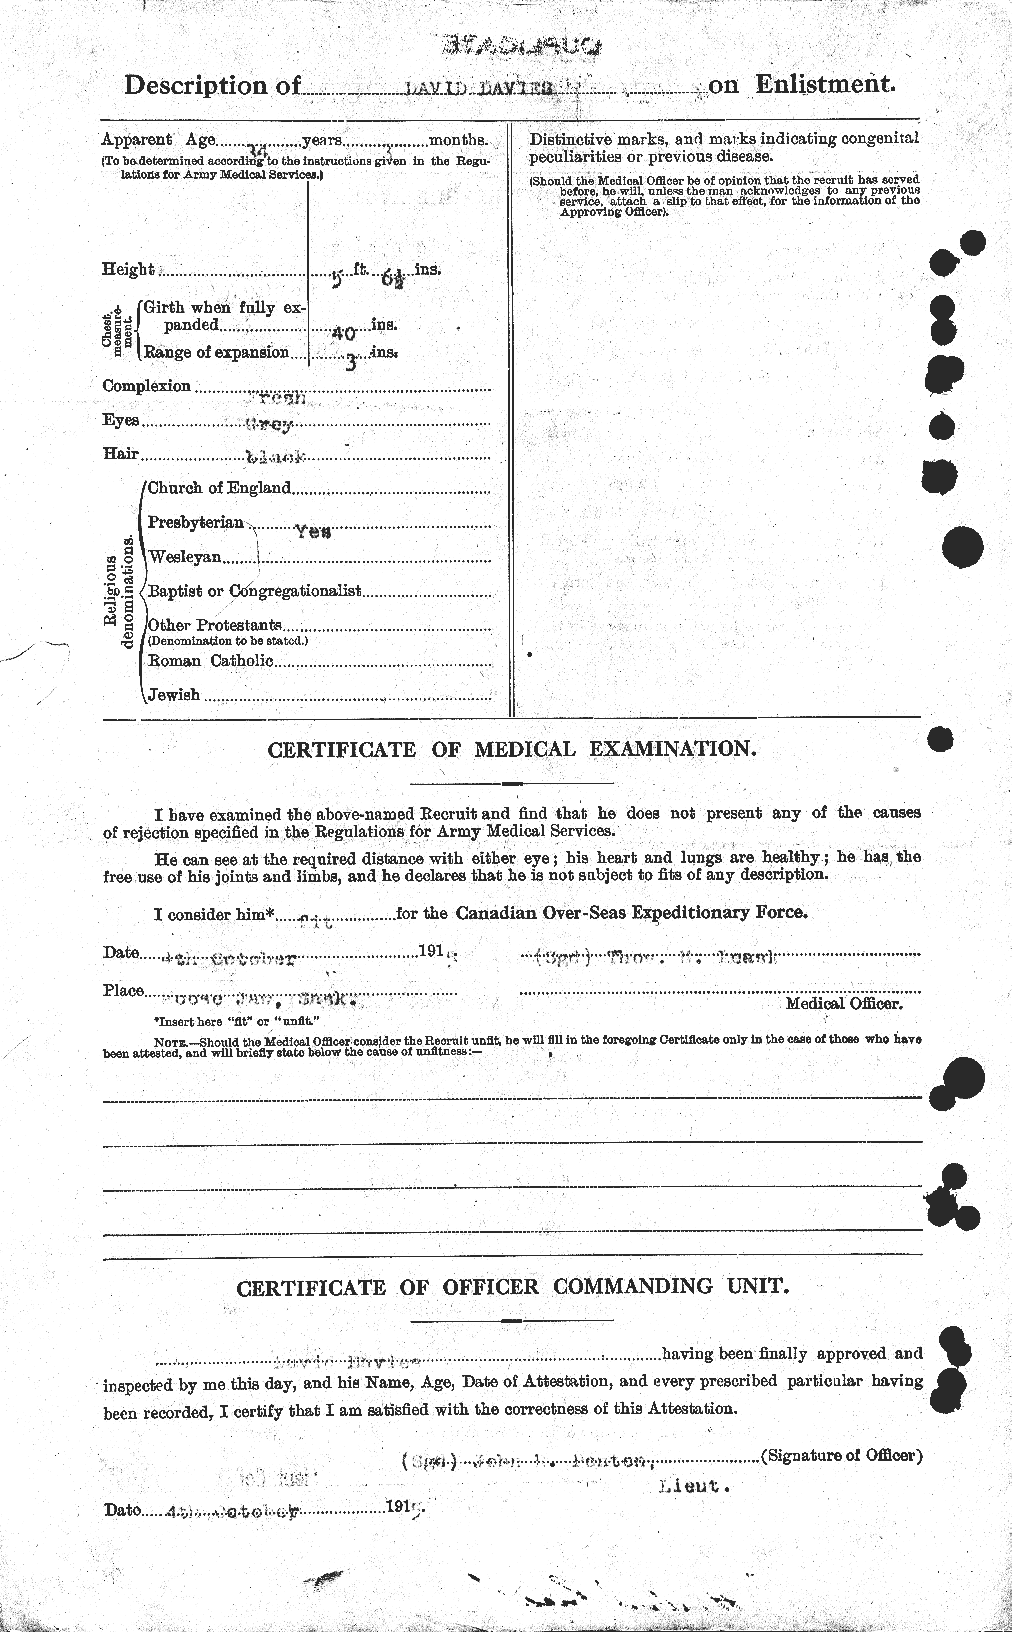 Personnel Records of the First World War - CEF 278947b